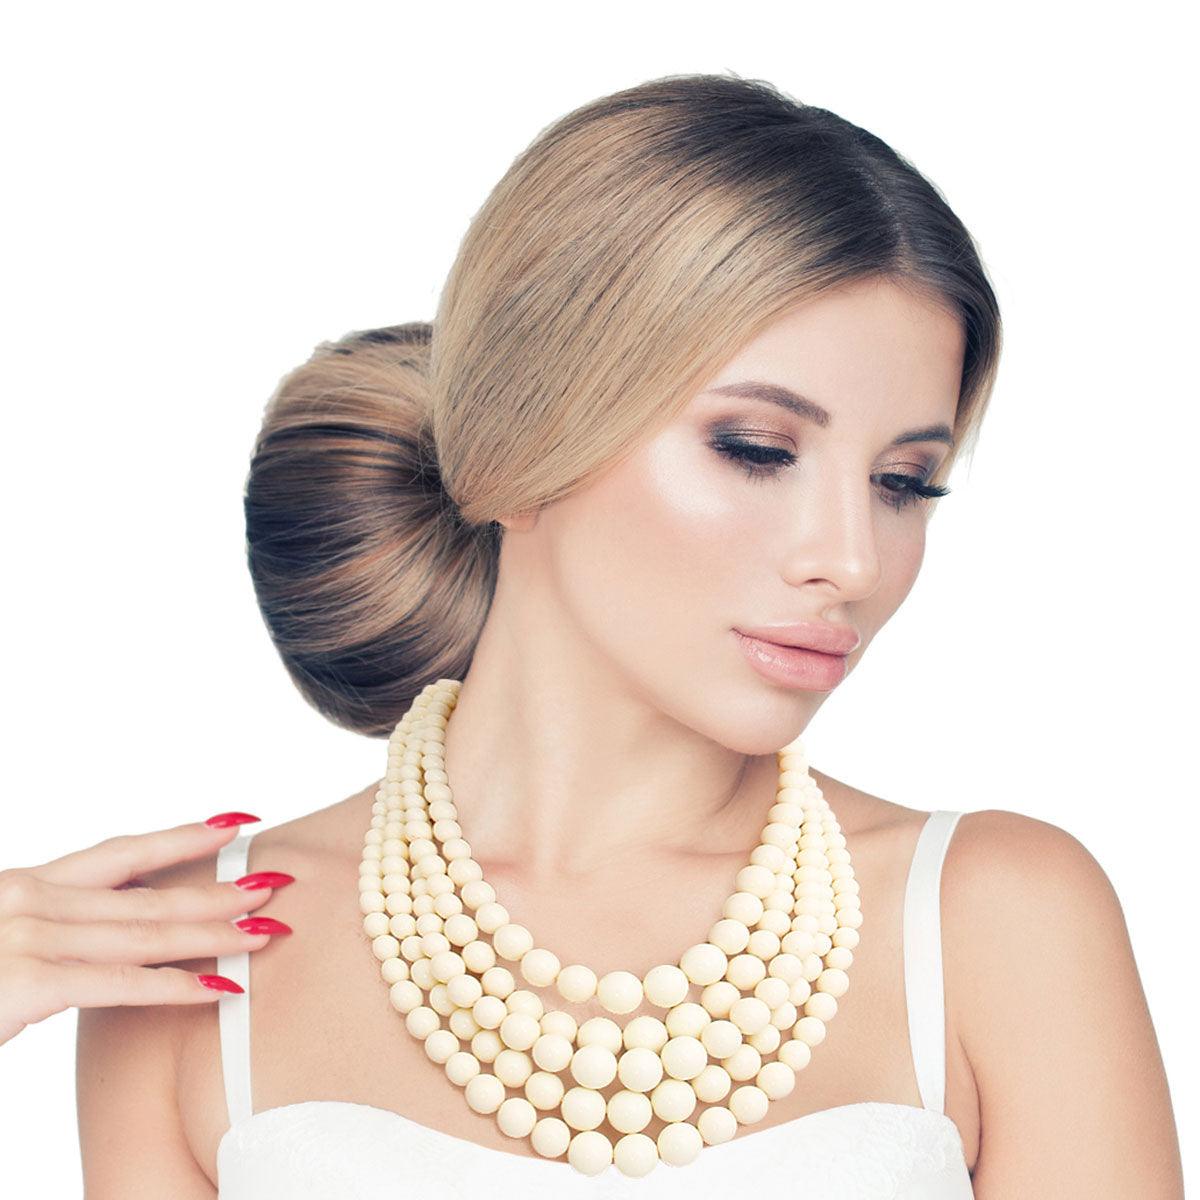 Get the Ultimate 5-Strand Ivory-color Beaded Necklace Set - Instantly Elevate Your Look!